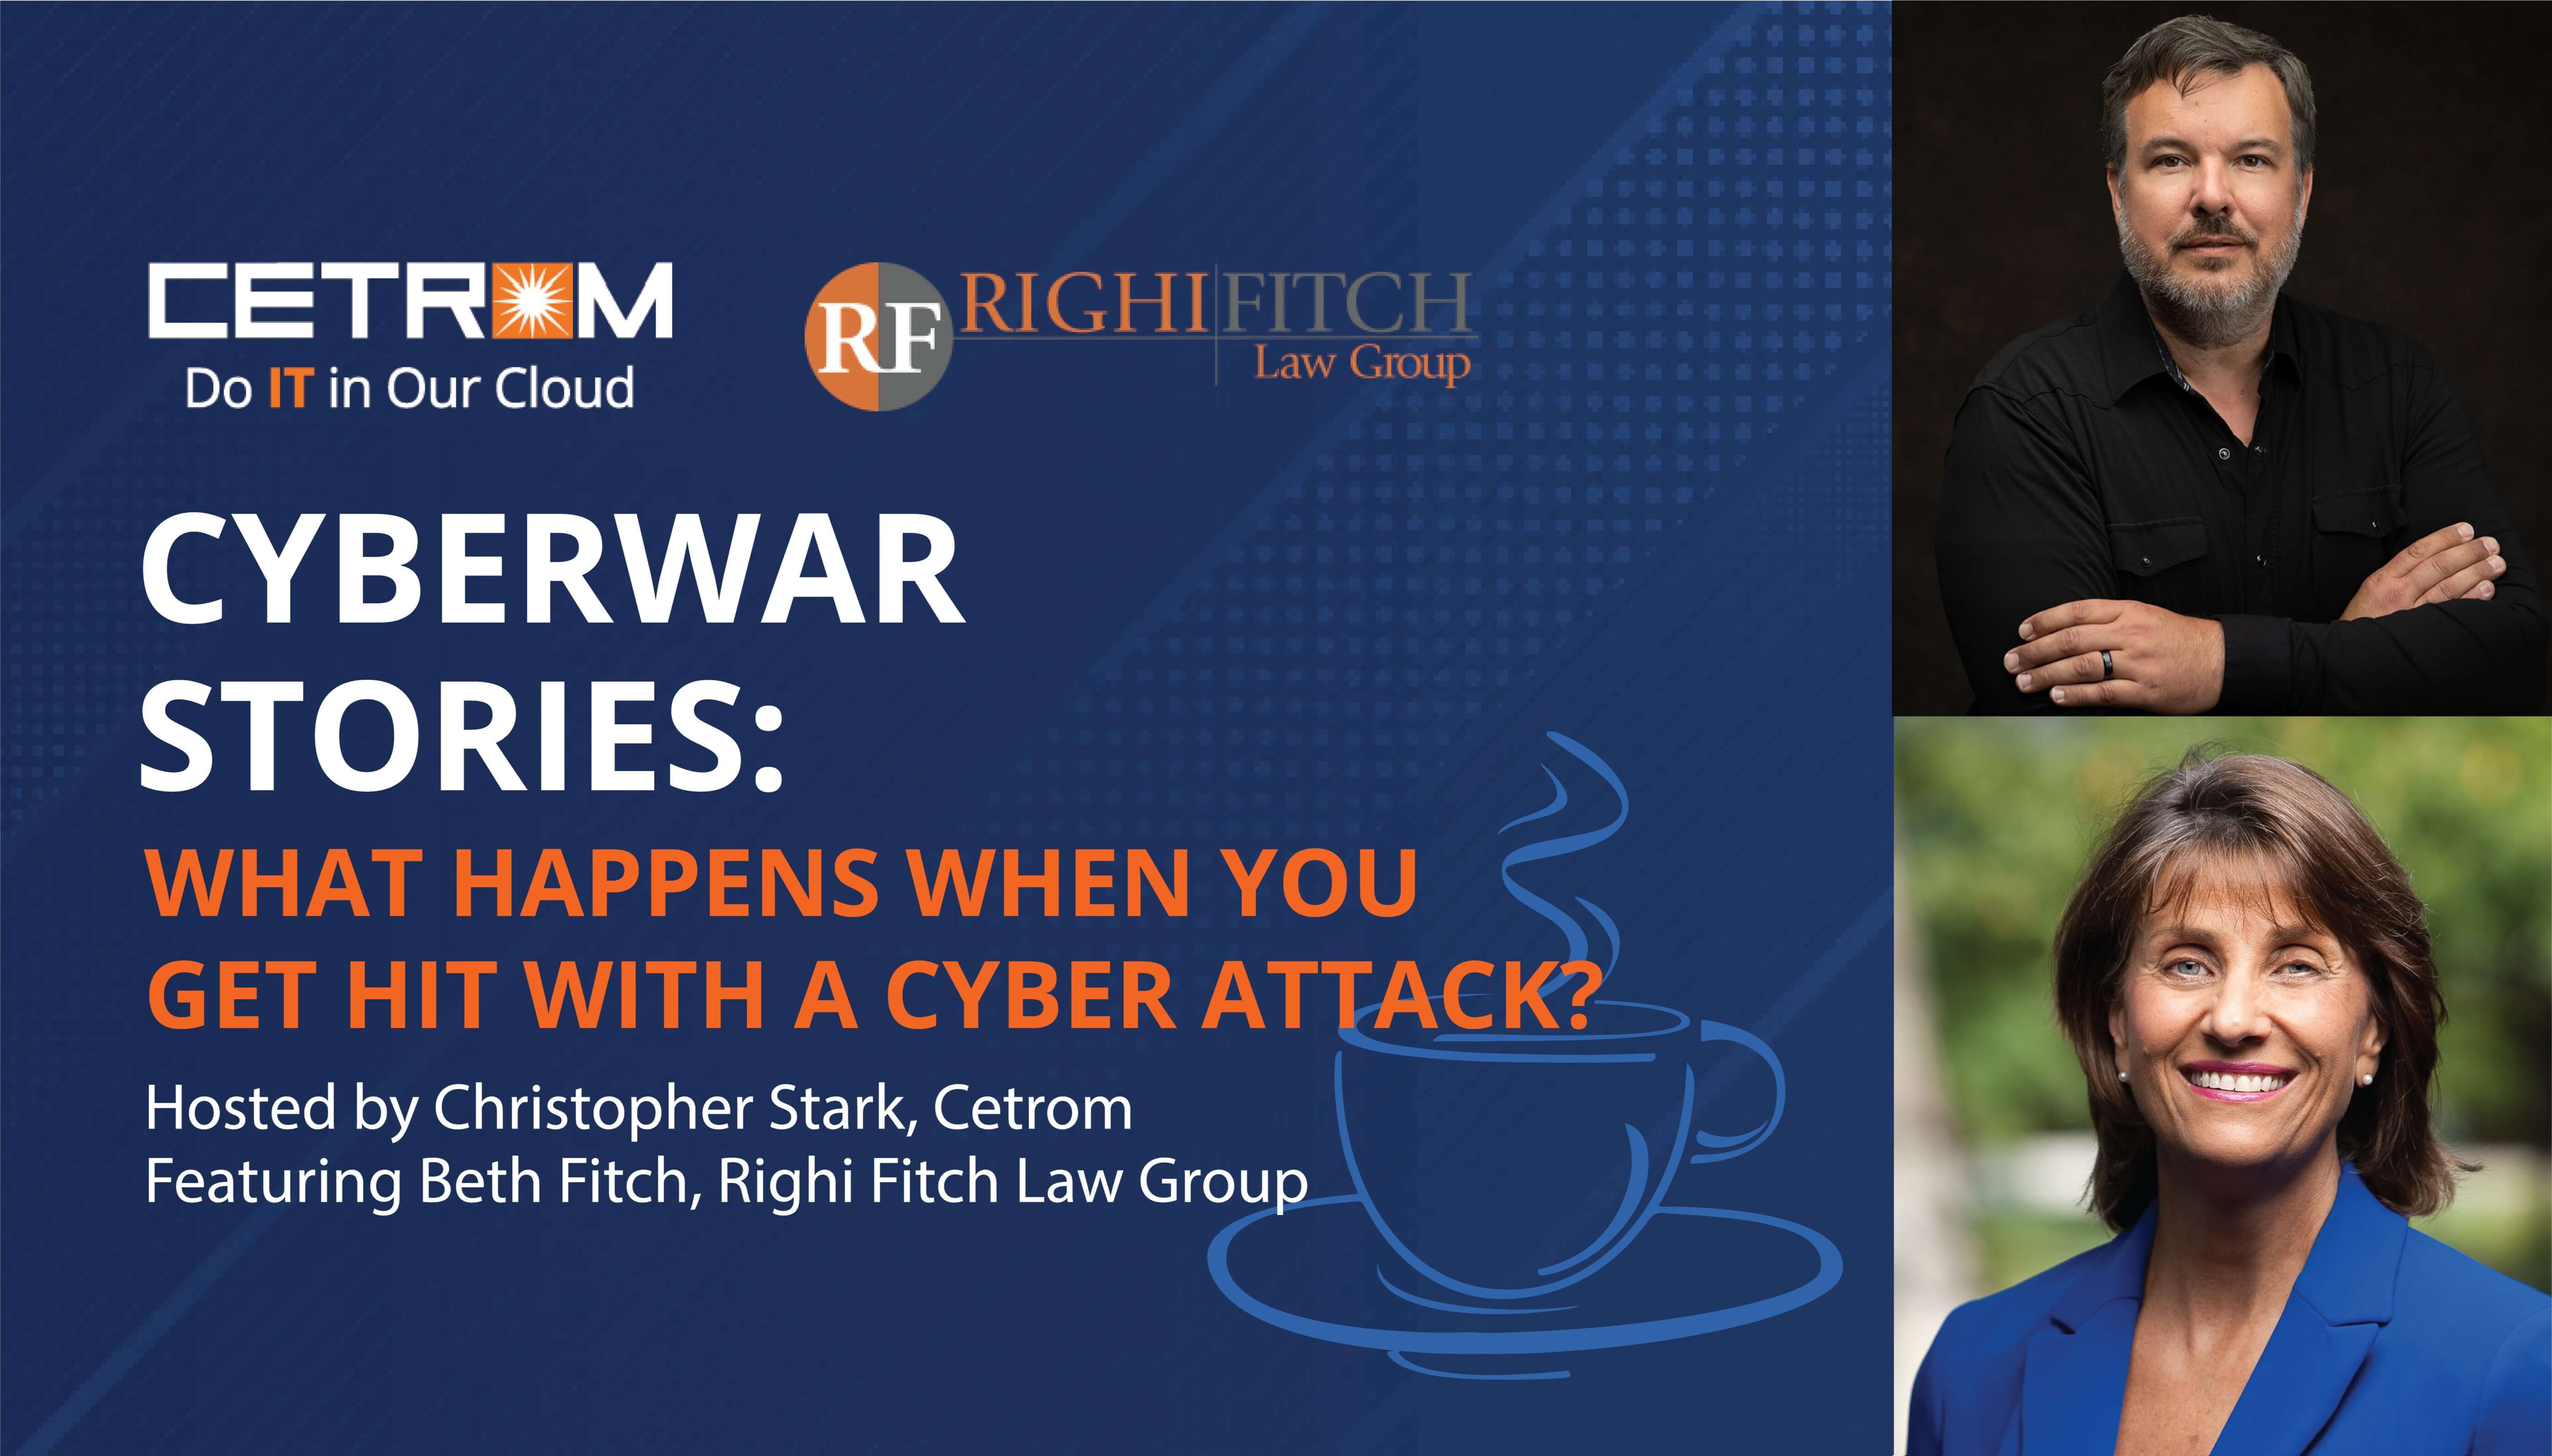 Coffee Talk: Cyberwar Stories - What Happens When you Get Hit with a Cyber Attack?